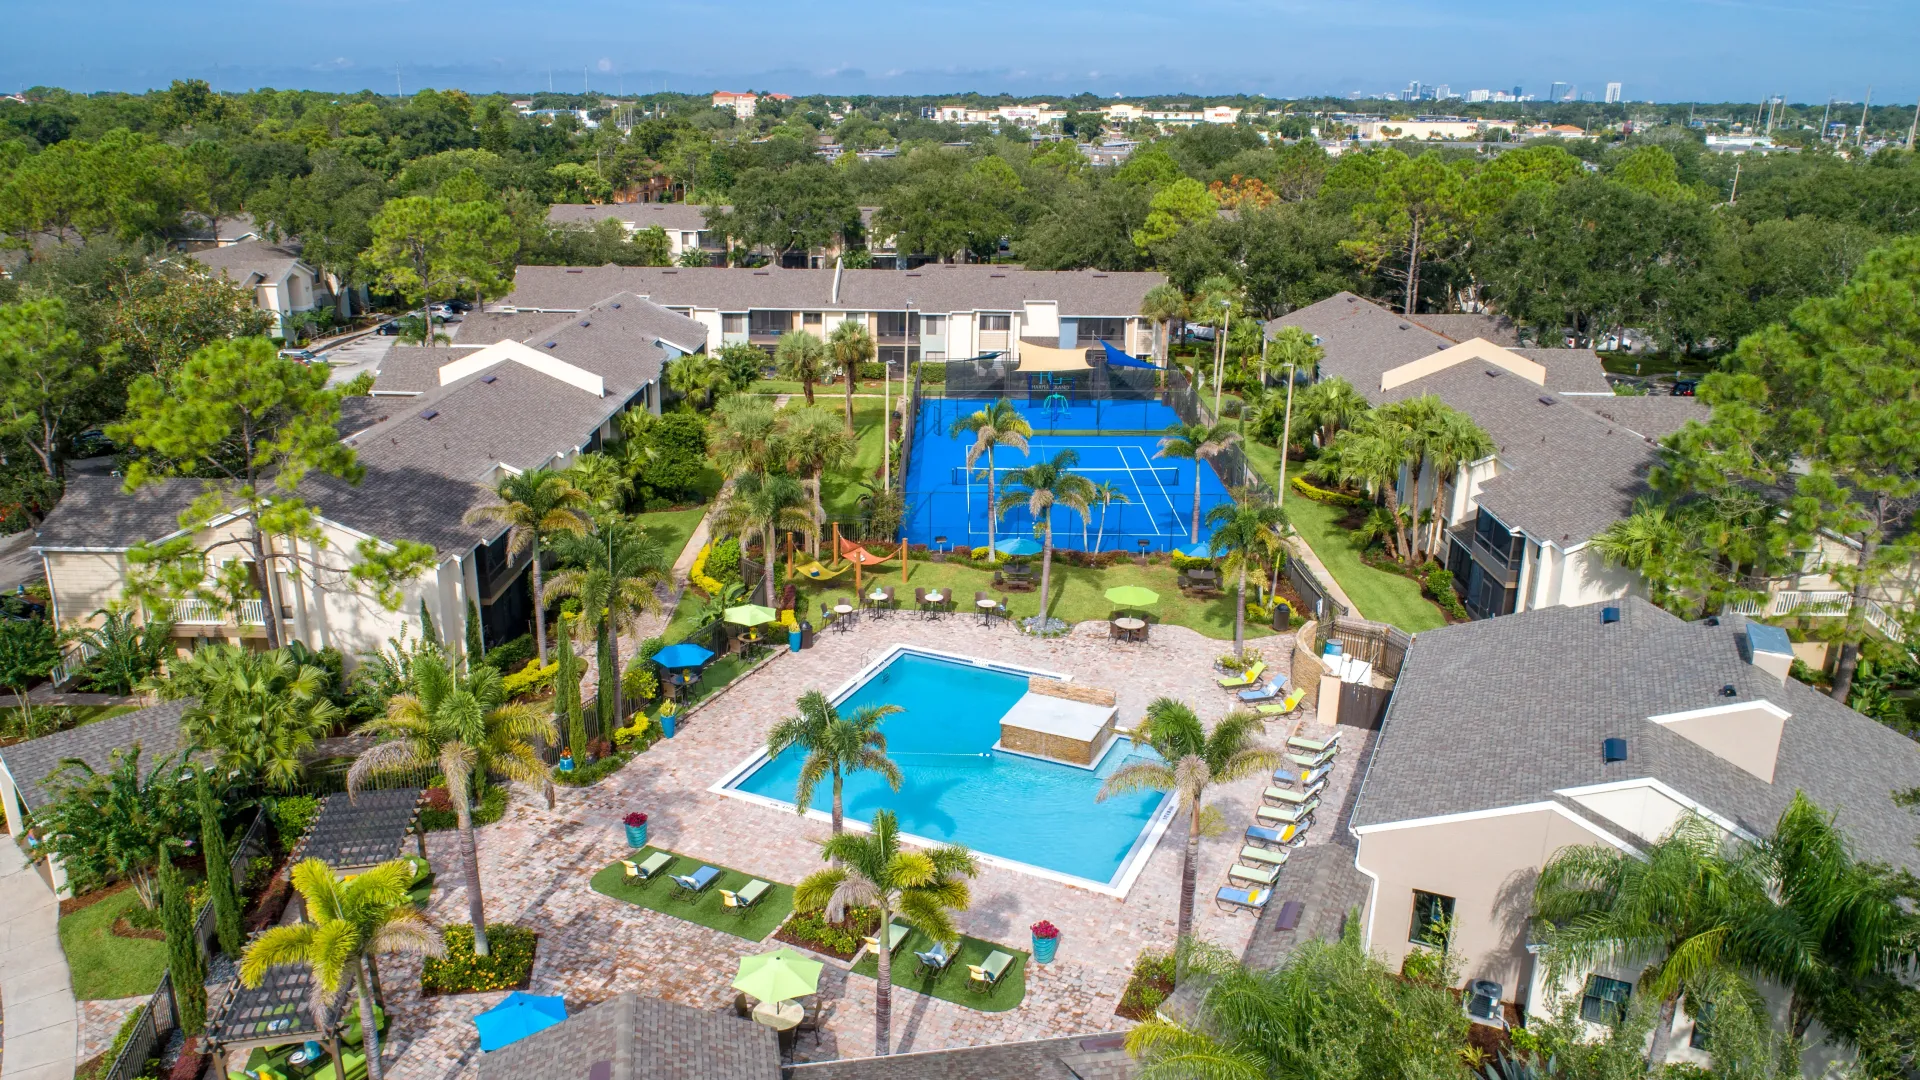 An aerial view of our splendid community, nestled among lush trees, highlighting the expansive sundeck and vibrant tennis court that mirrors the sparkling blue pool.